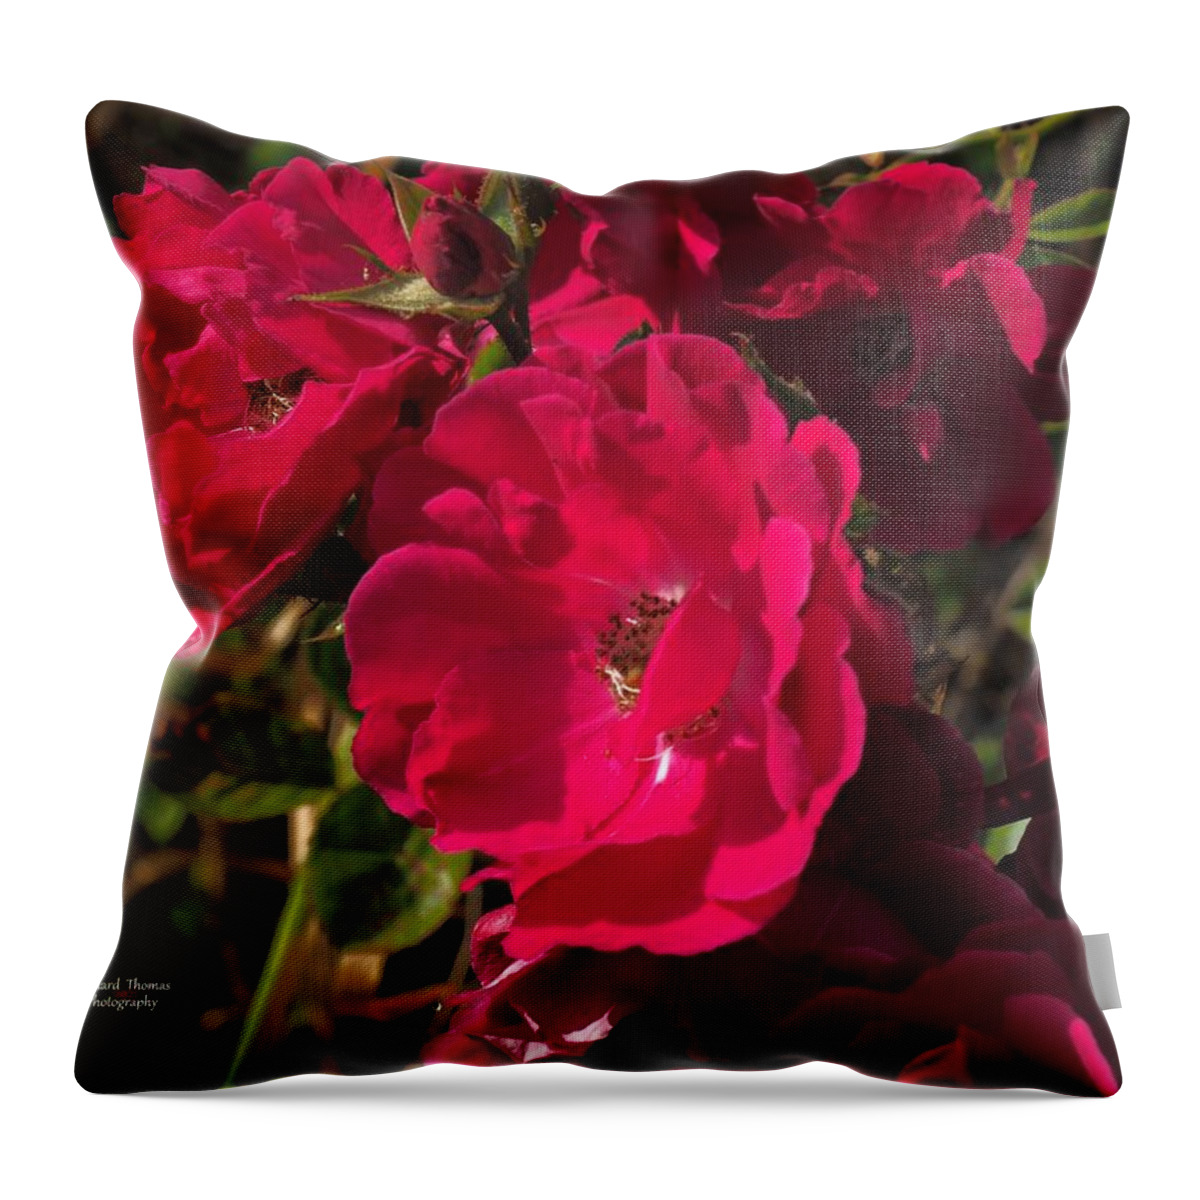 Botanical Throw Pillow featuring the photograph Beautiful Red Roses by Richard Thomas